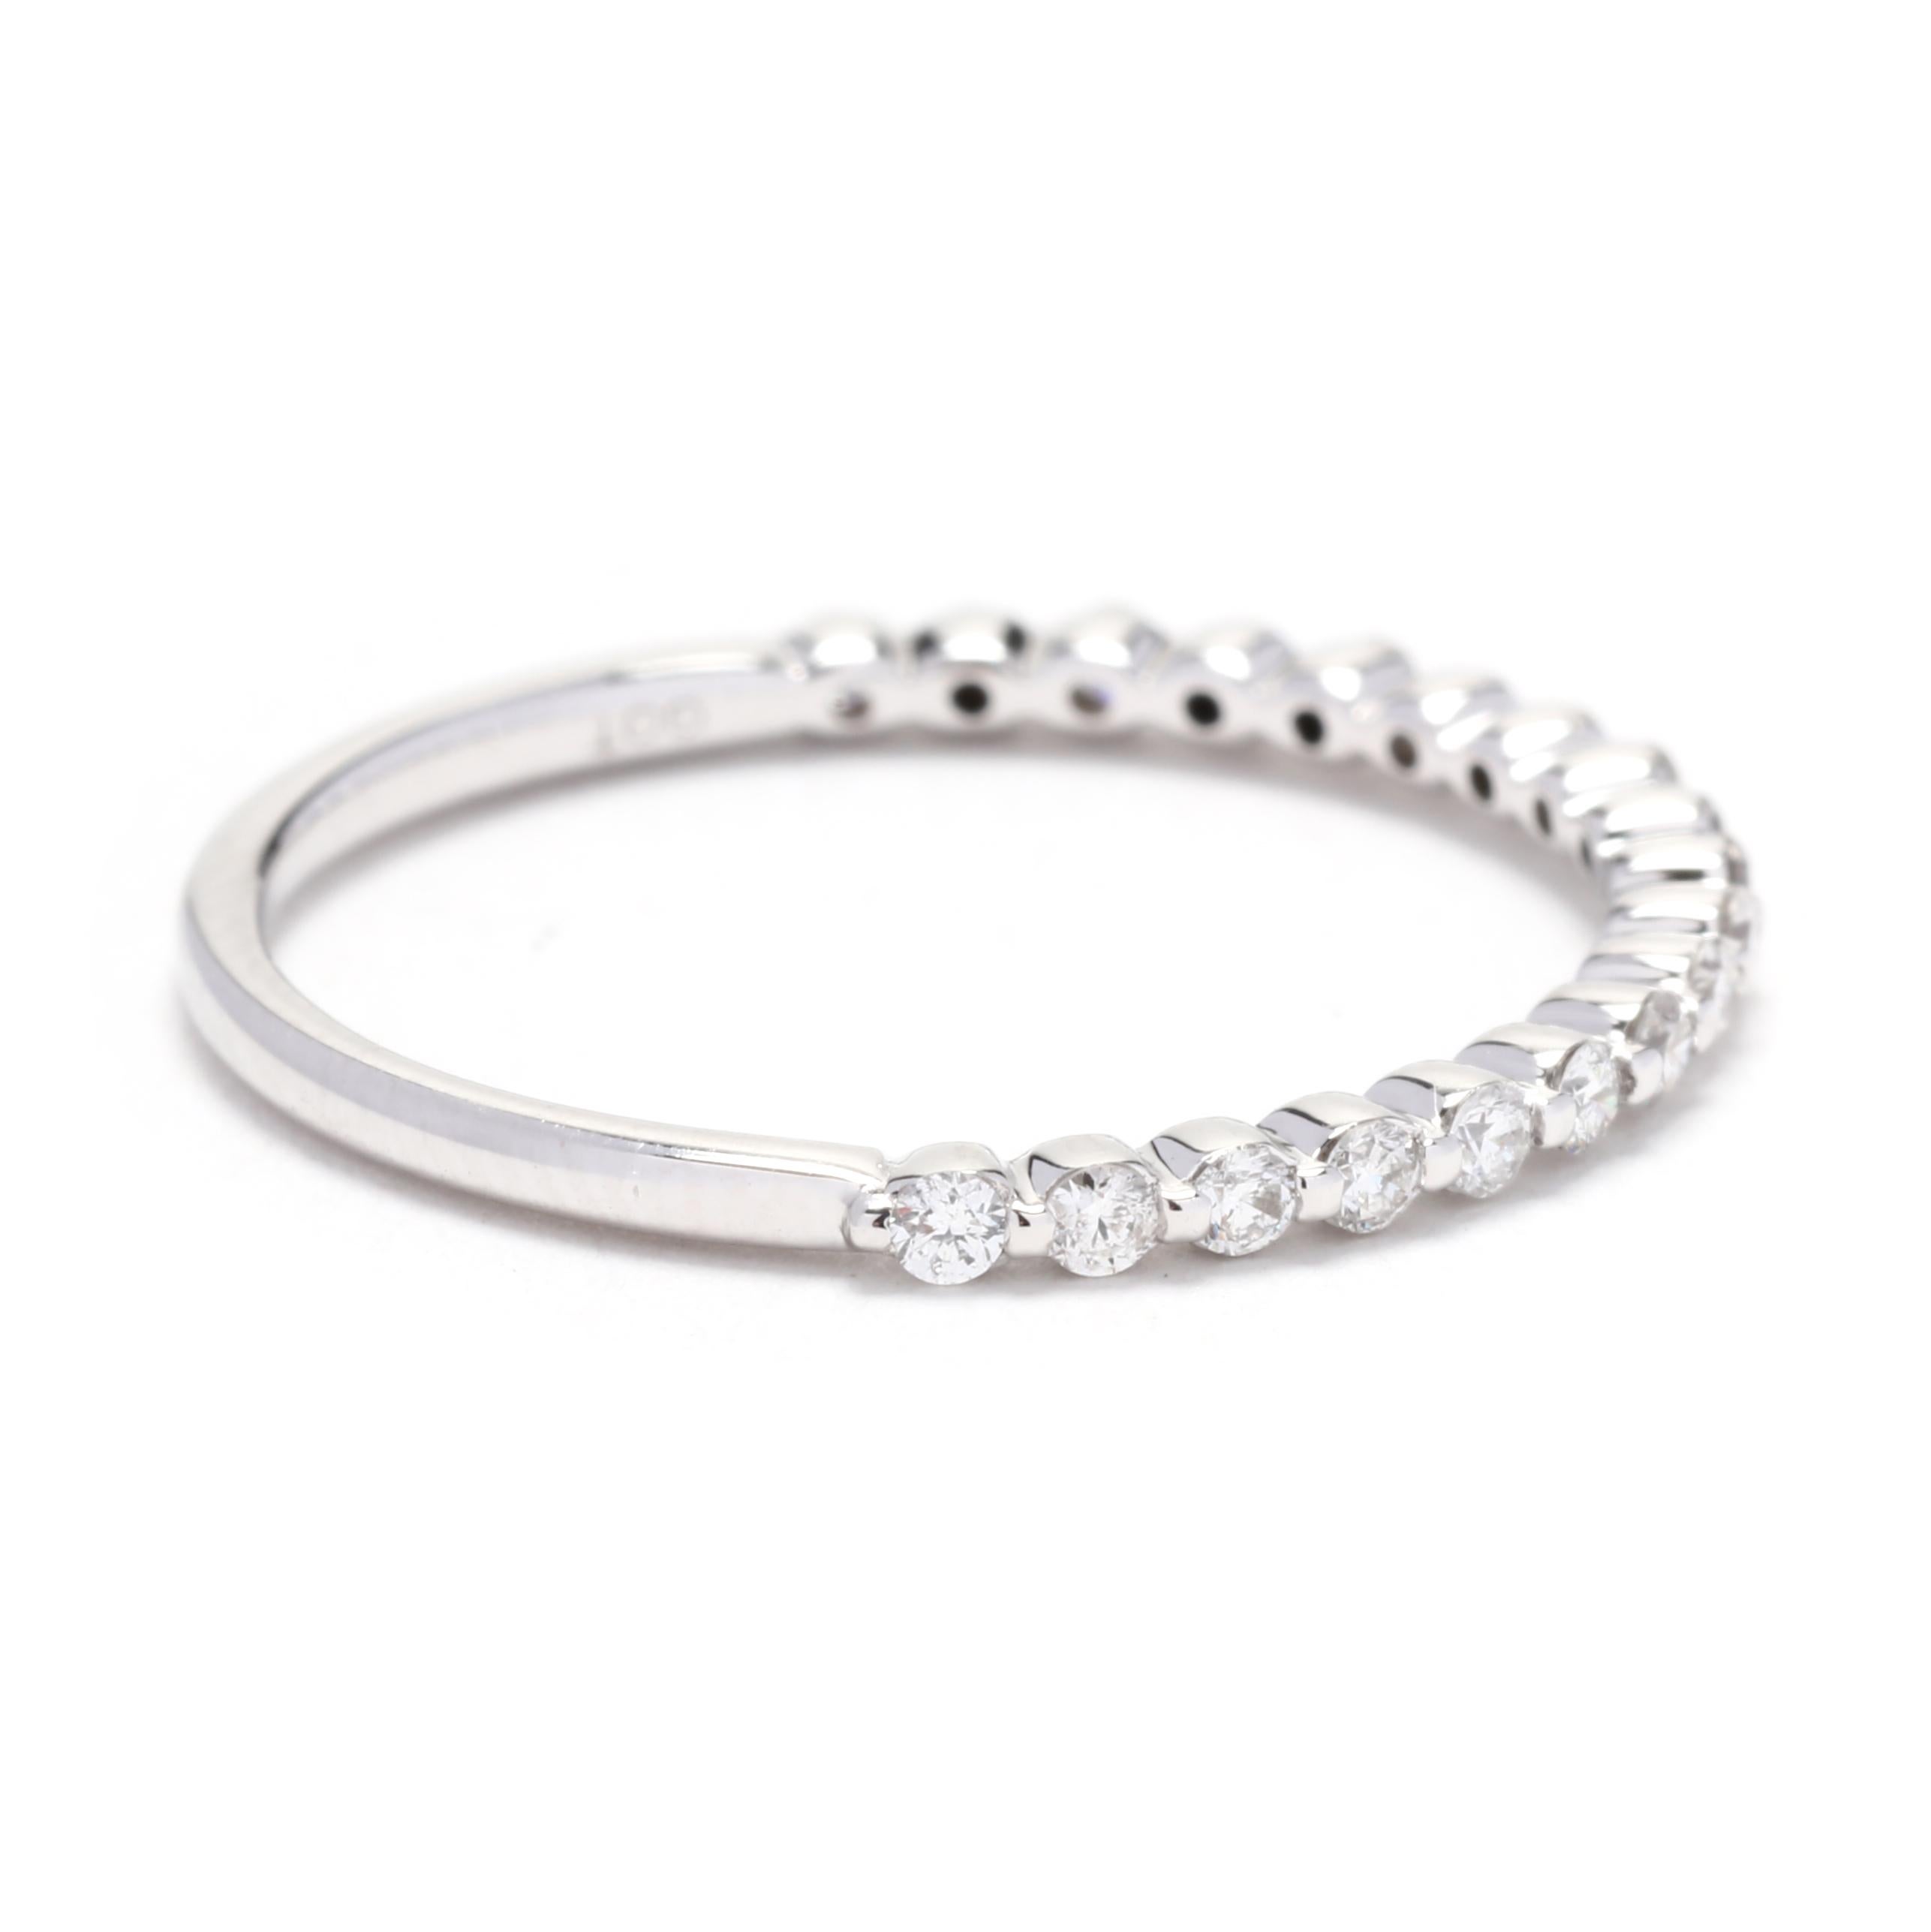 Add a touch of sparkle to your wedding day with this beautiful 0.30ctw thin diamond wedding band. Made in 14K white gold, this ring features a classic and timeless design that will never go out of style. The band is set with 15 round brilliant cut